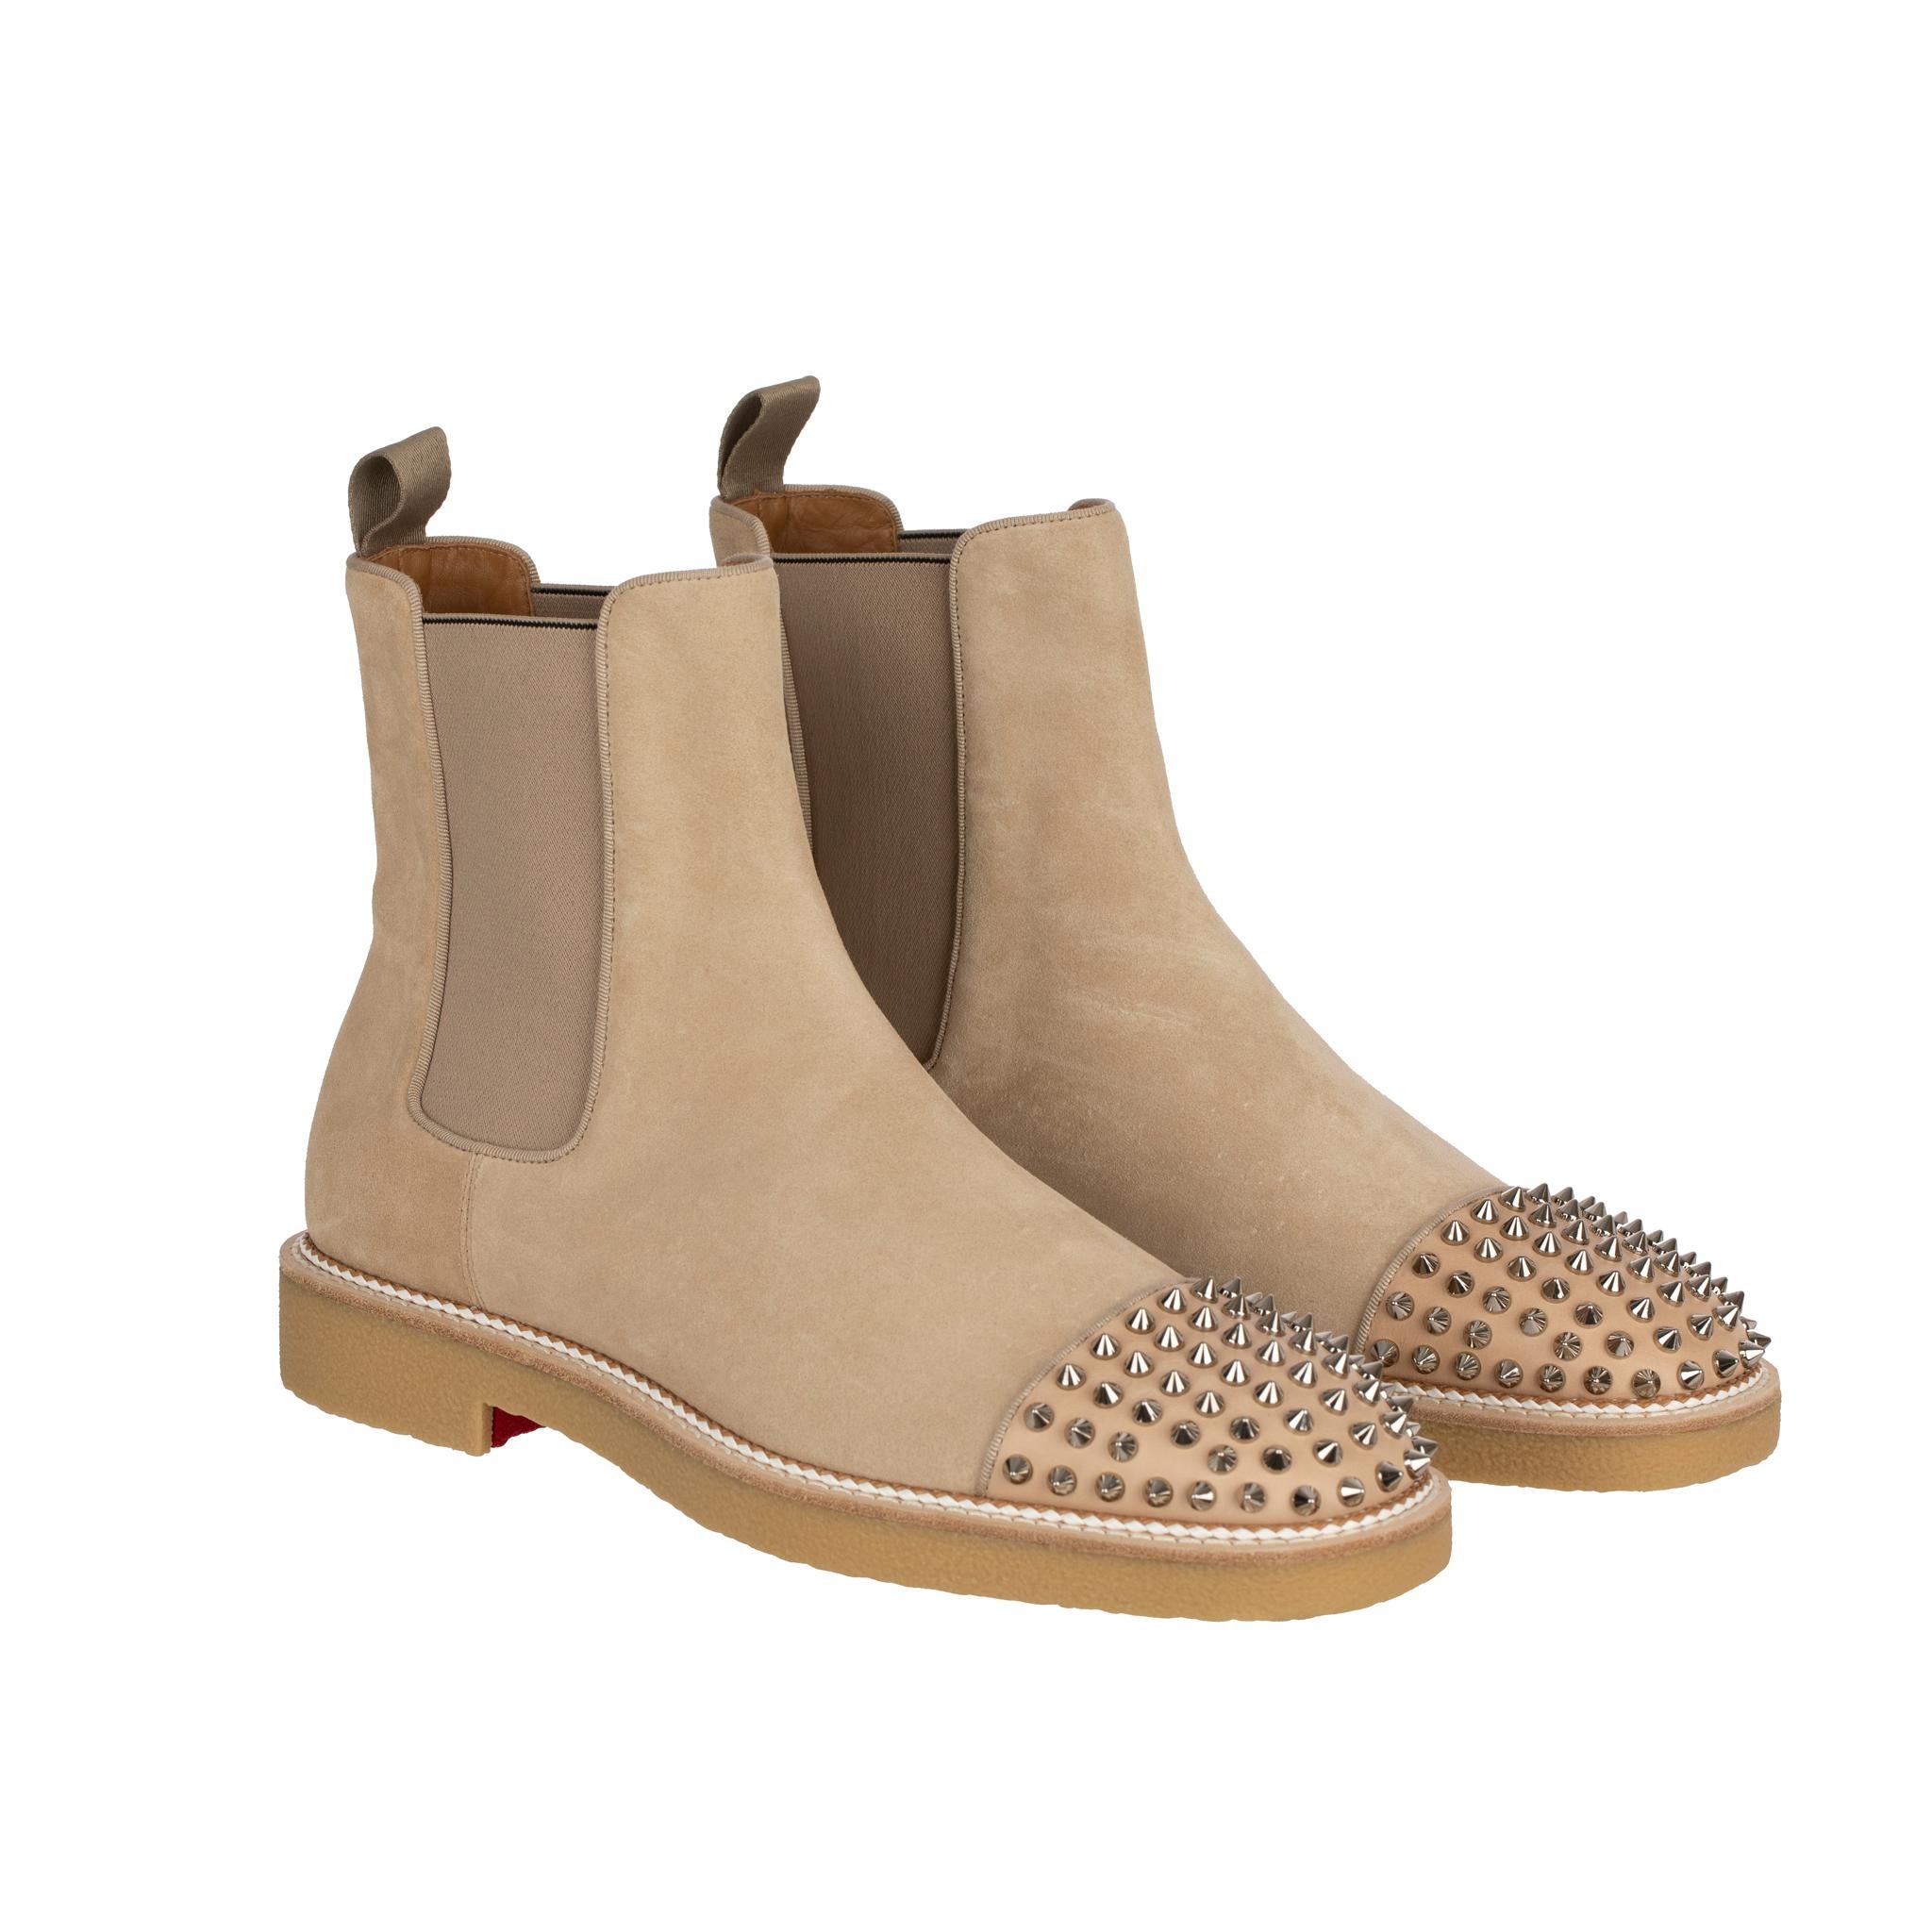 Christian Louboutin Mens Beige Suede Boots With Studs 41.5 FR For Sale 2